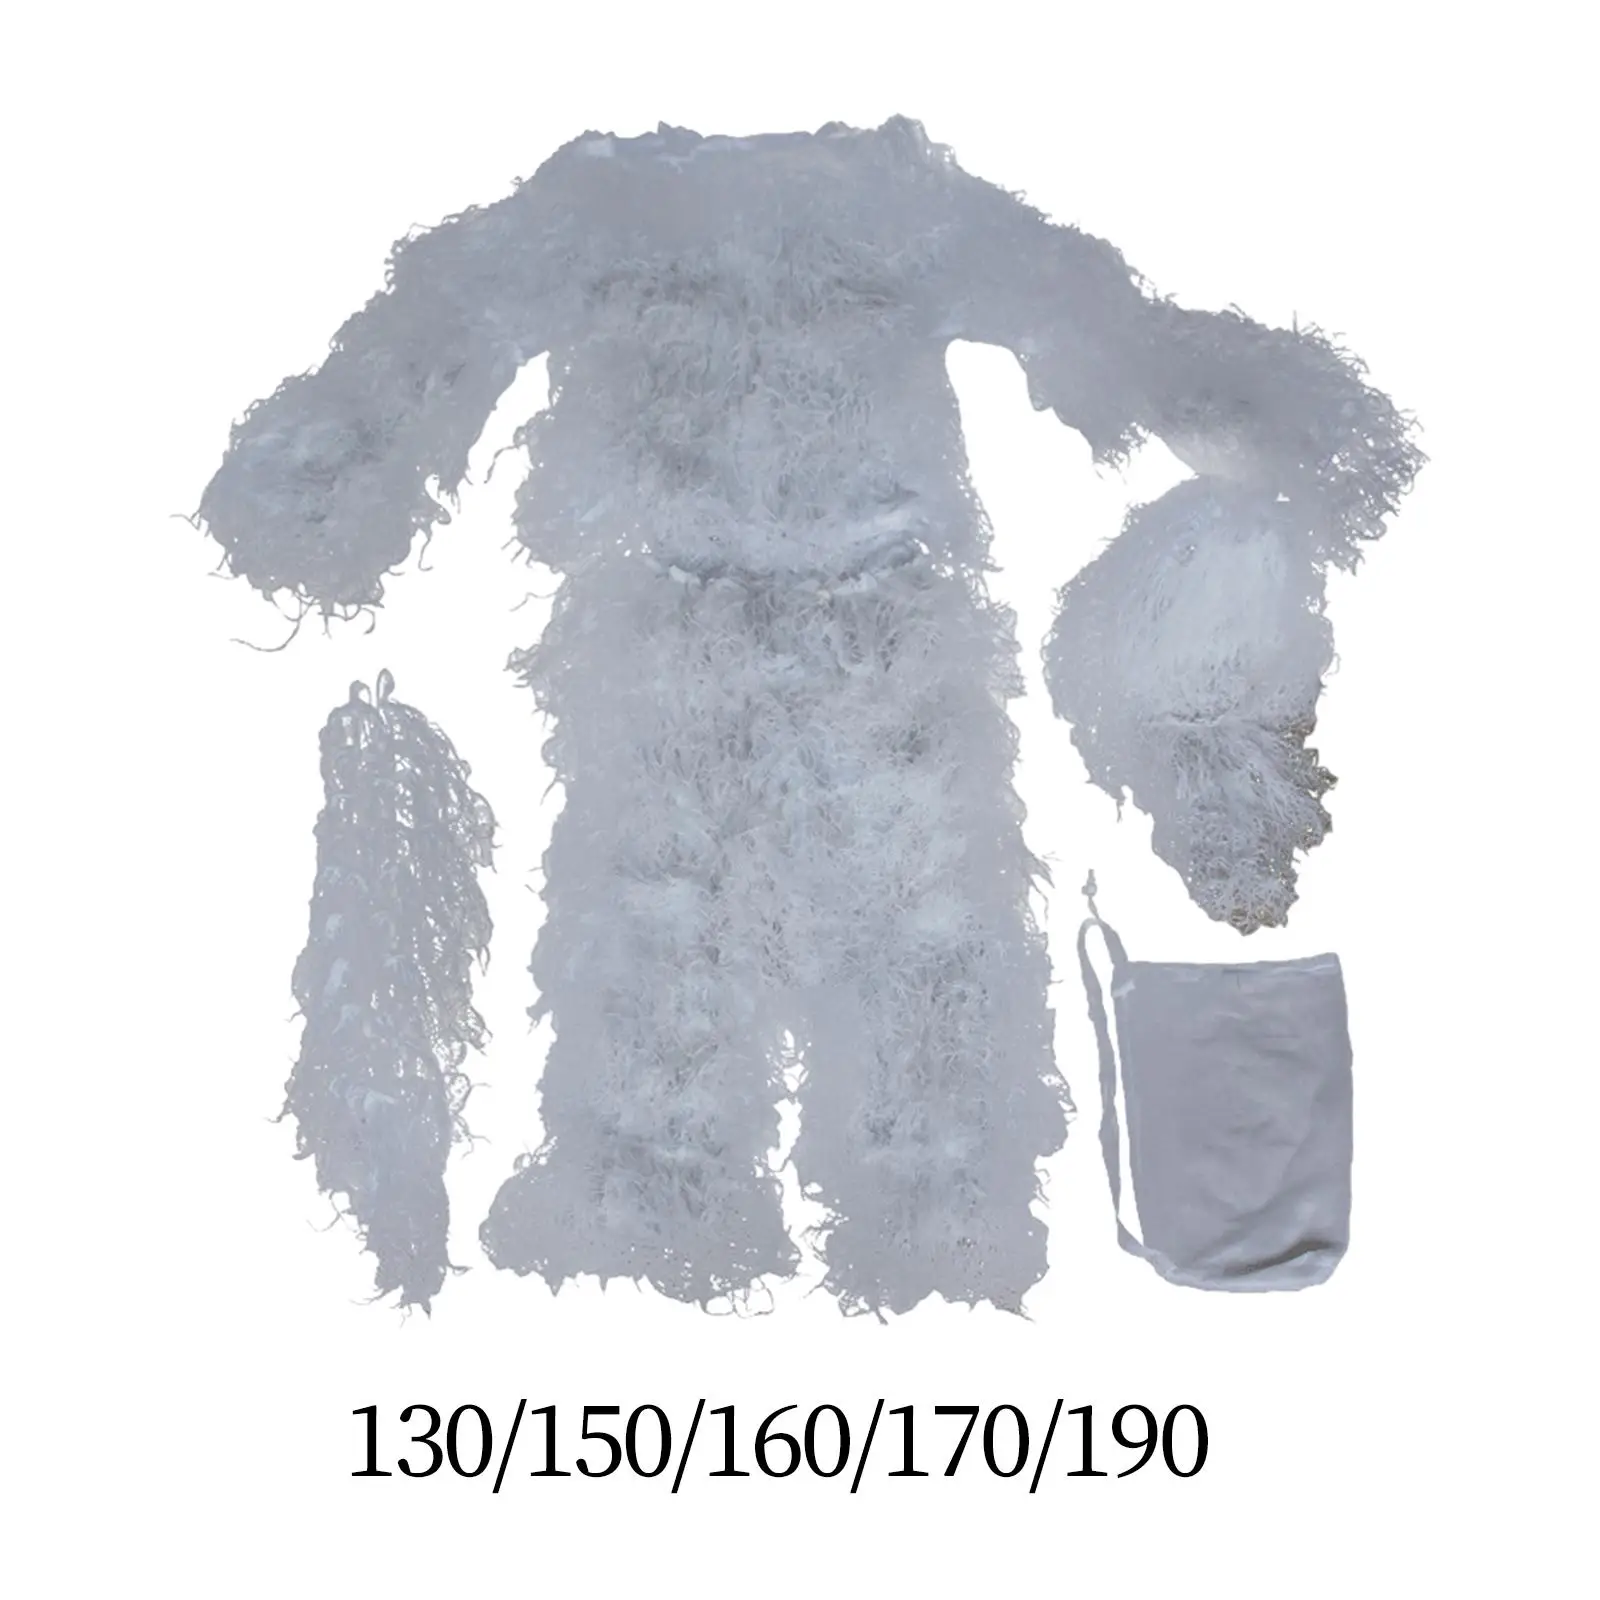 Ghillie Suit Hunting Suits Two-Piece Suit for Adult Children Suit Outdoor Clothing Halloween Turkey Hunting